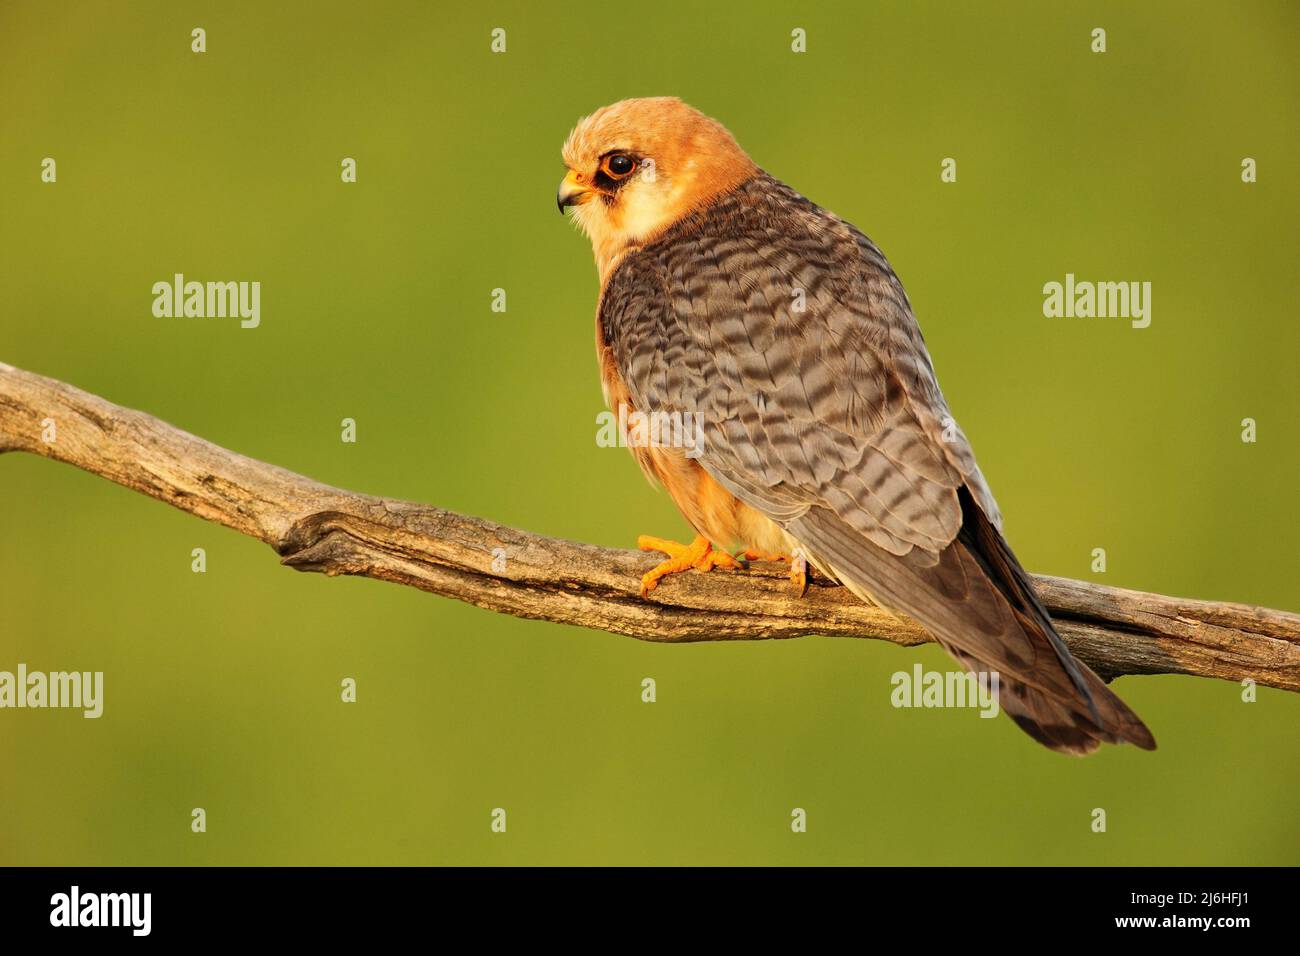 Bird Red-footed Falcon, Falco vespertinus, sitting on branch with clear ...